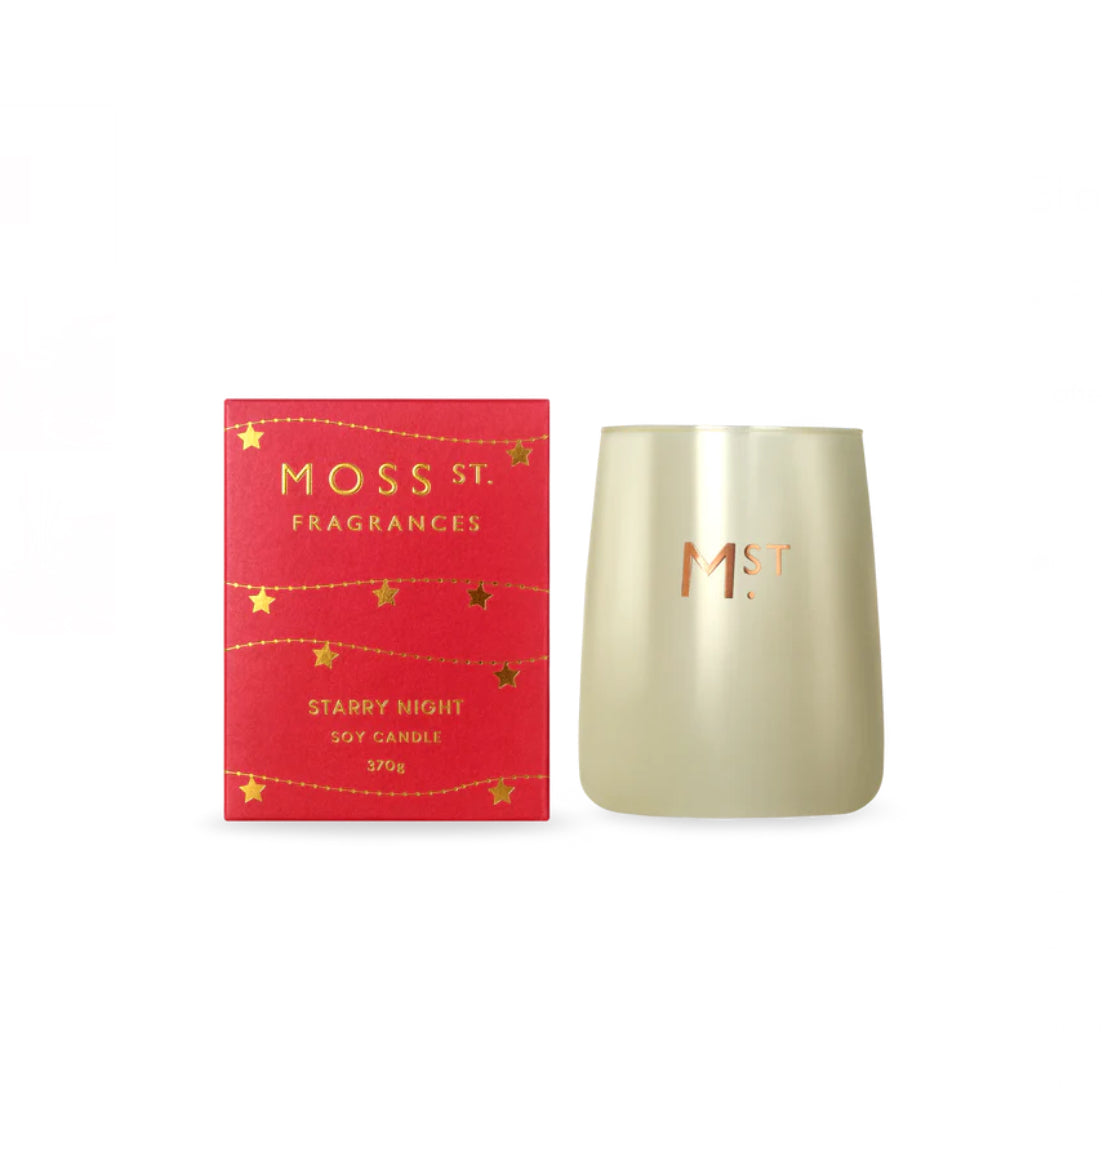 MOSS St. Starry Night Soy Candle 370g